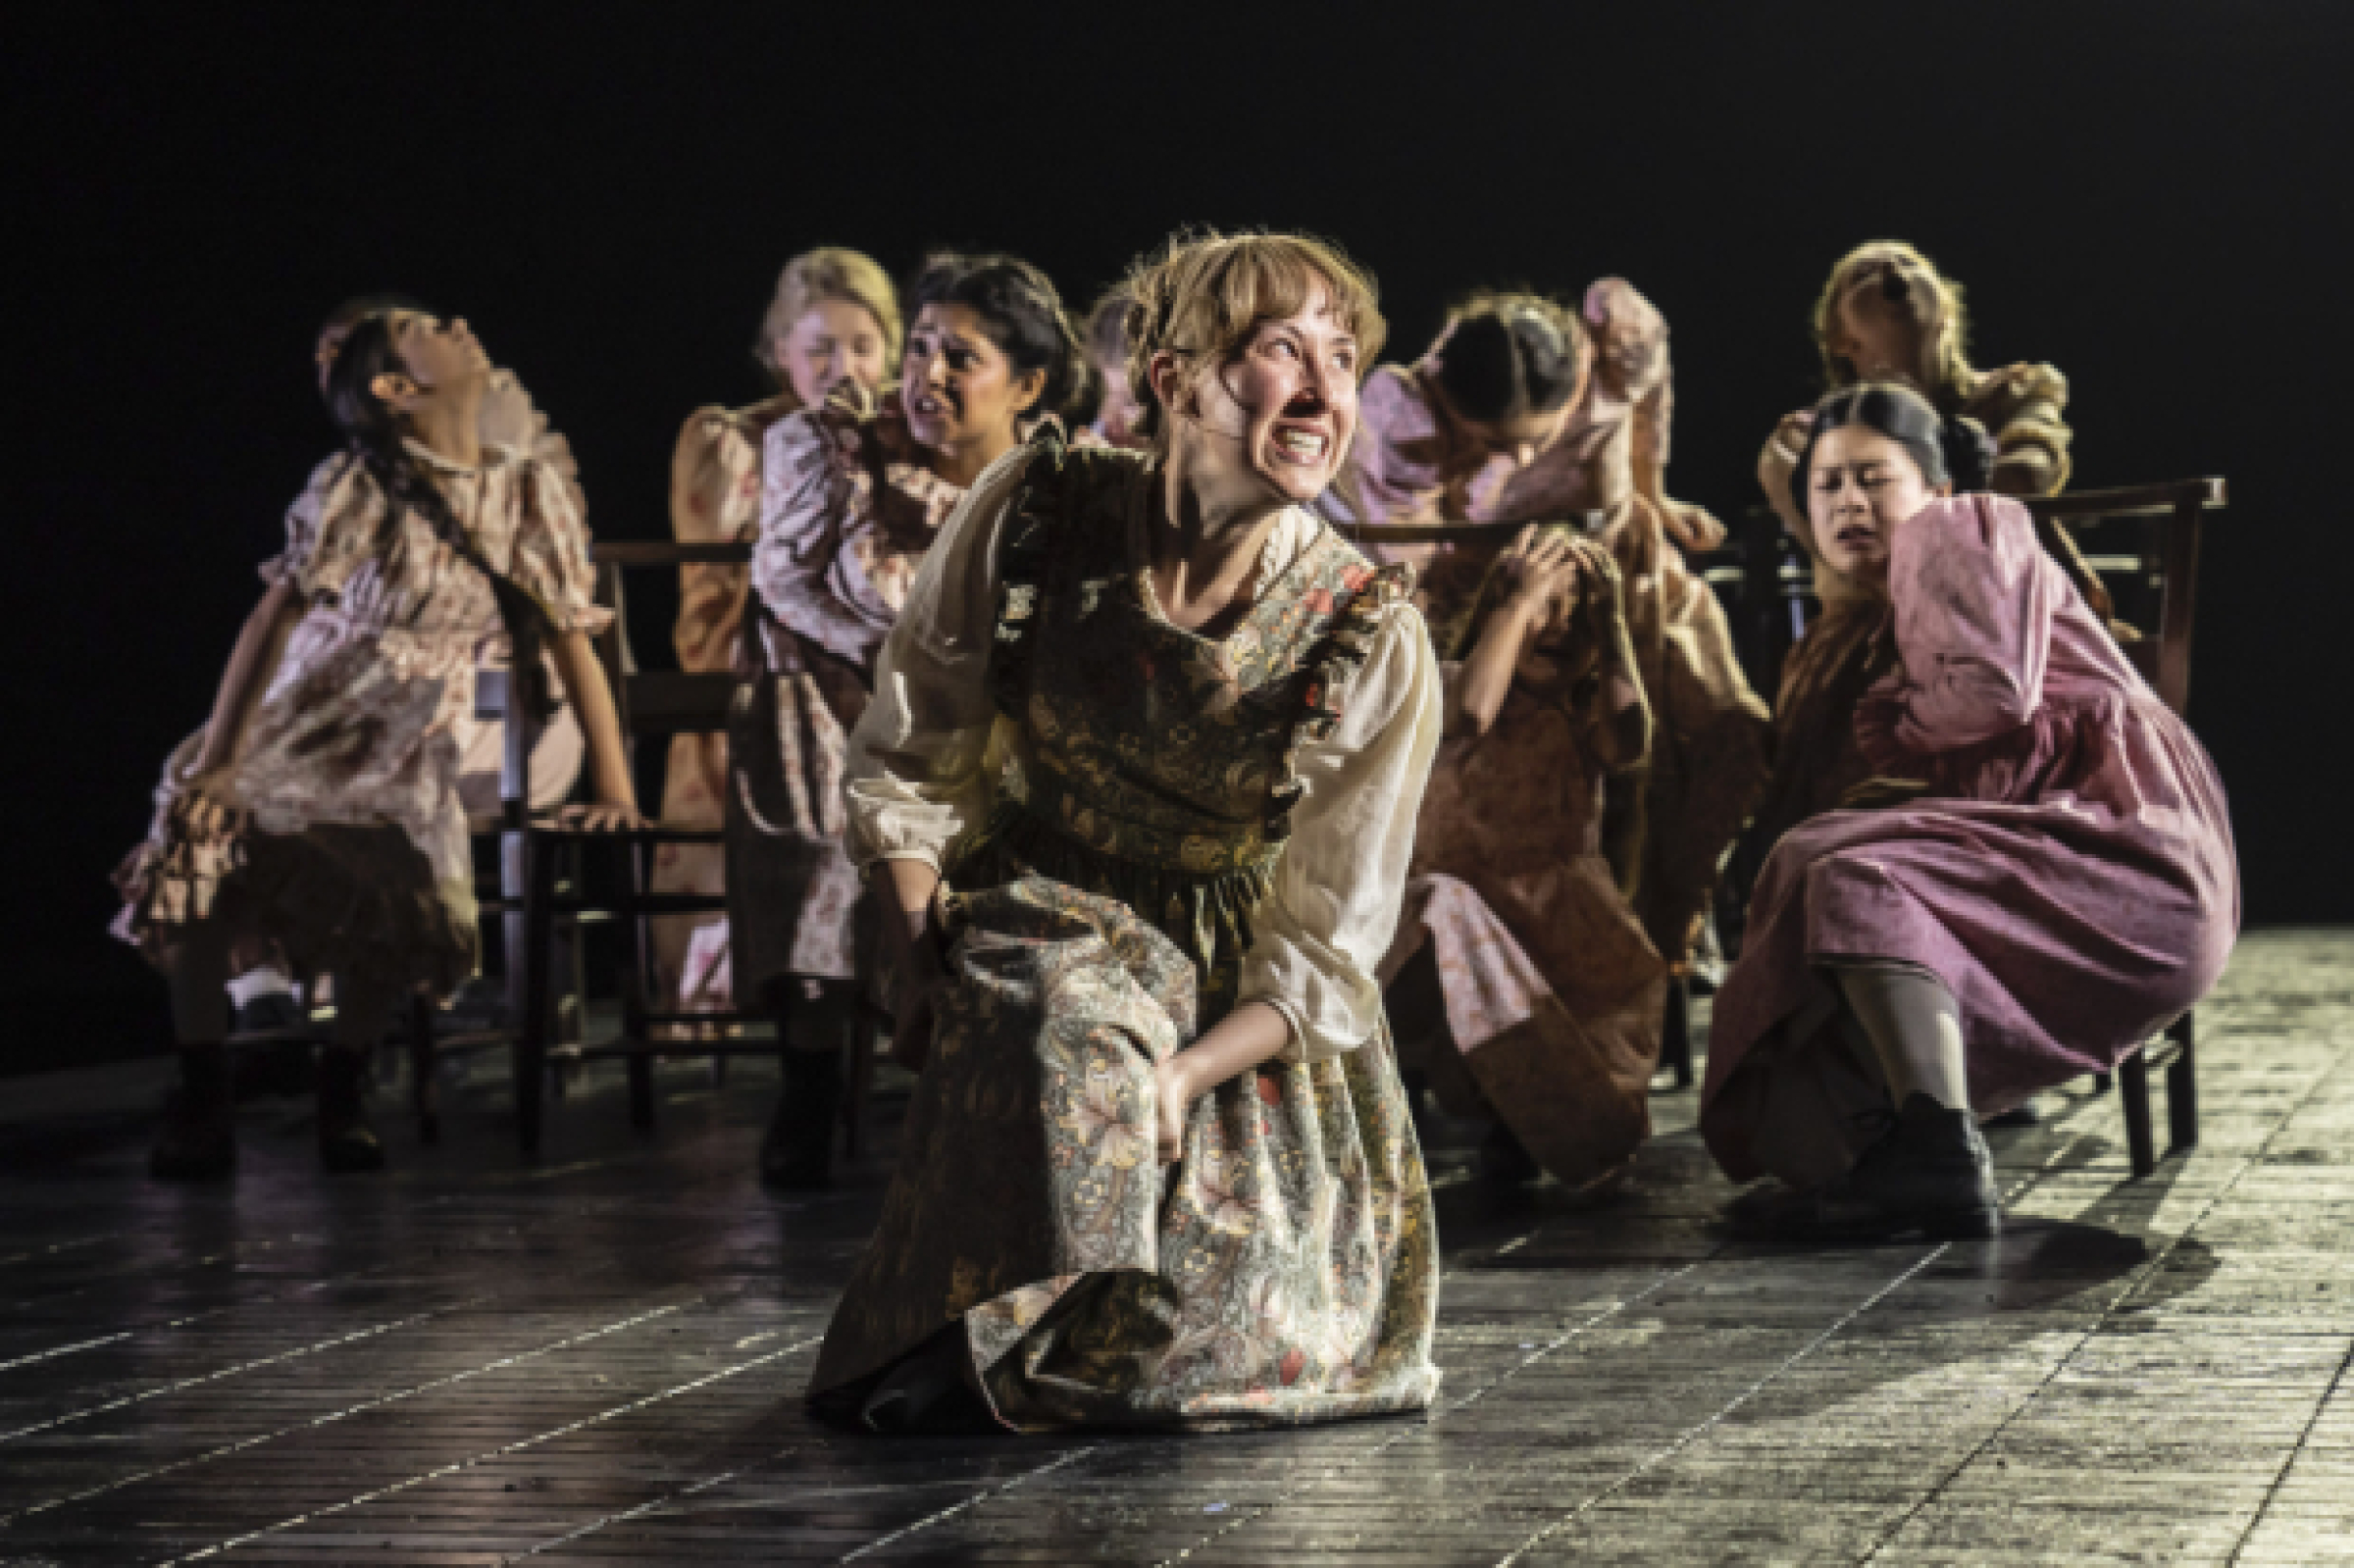 National Theatre Live: The Crucible